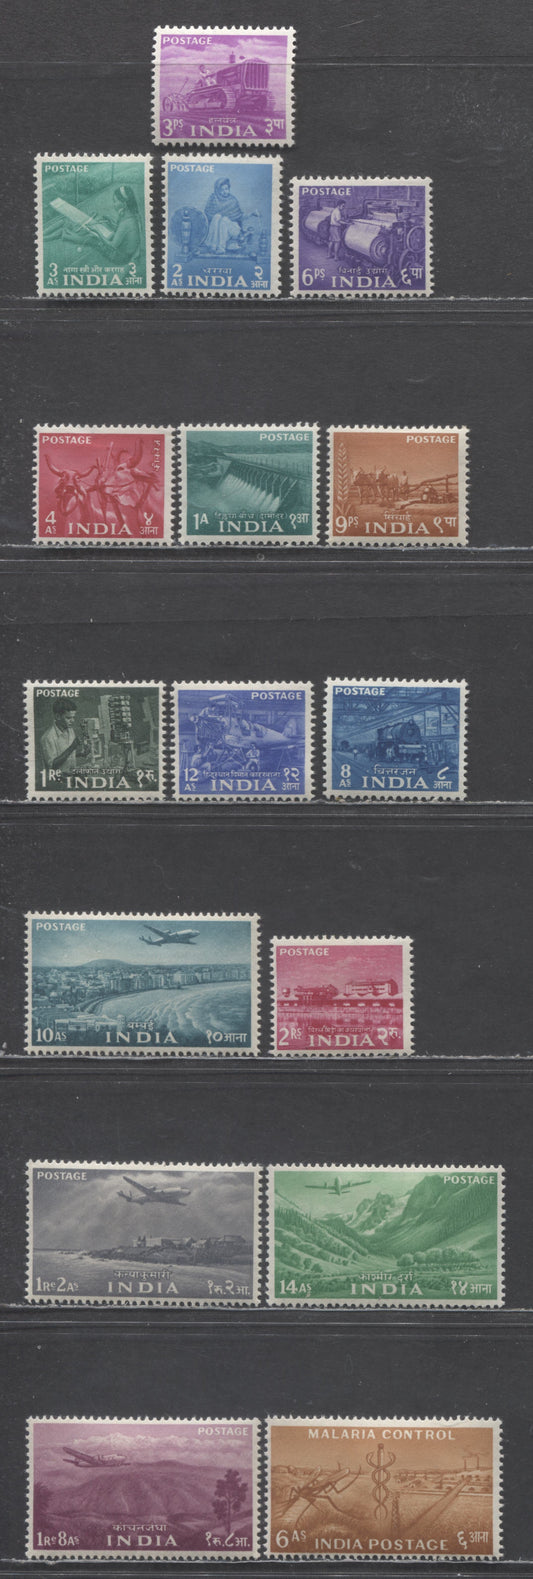 Lot 87 India SC#254-269 1955 Industry Definitives, 16 VFOG Singles, Click on Listing to See ALL Pictures, Estimated Value $26